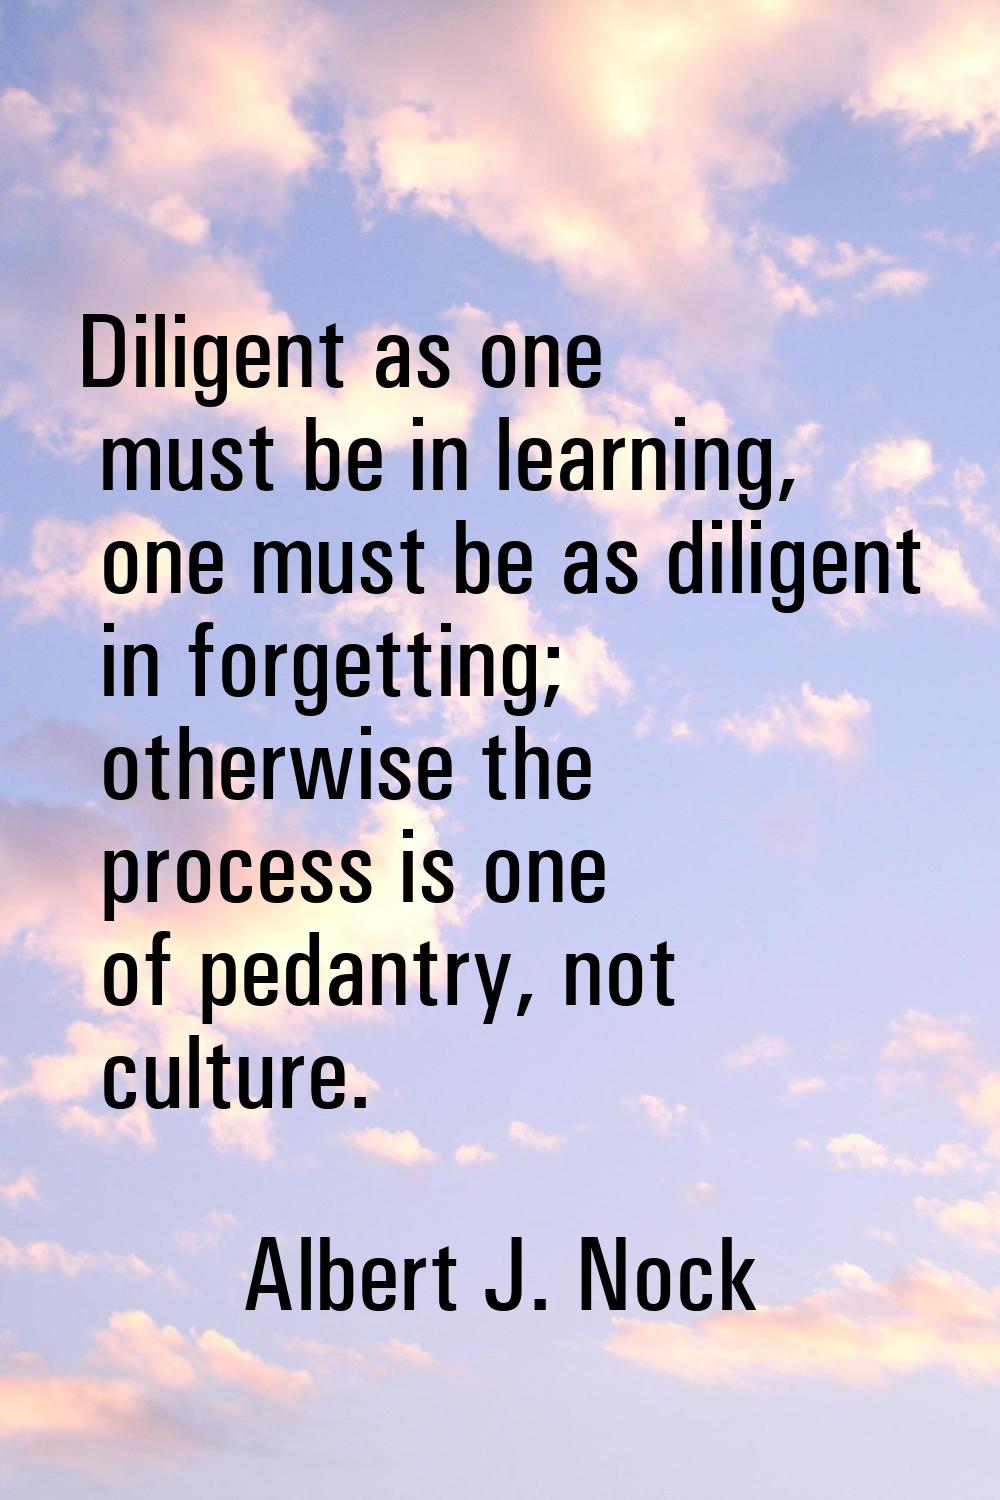 Diligent as one must be in learning, one must be as diligent in forgetting; otherwise the process i